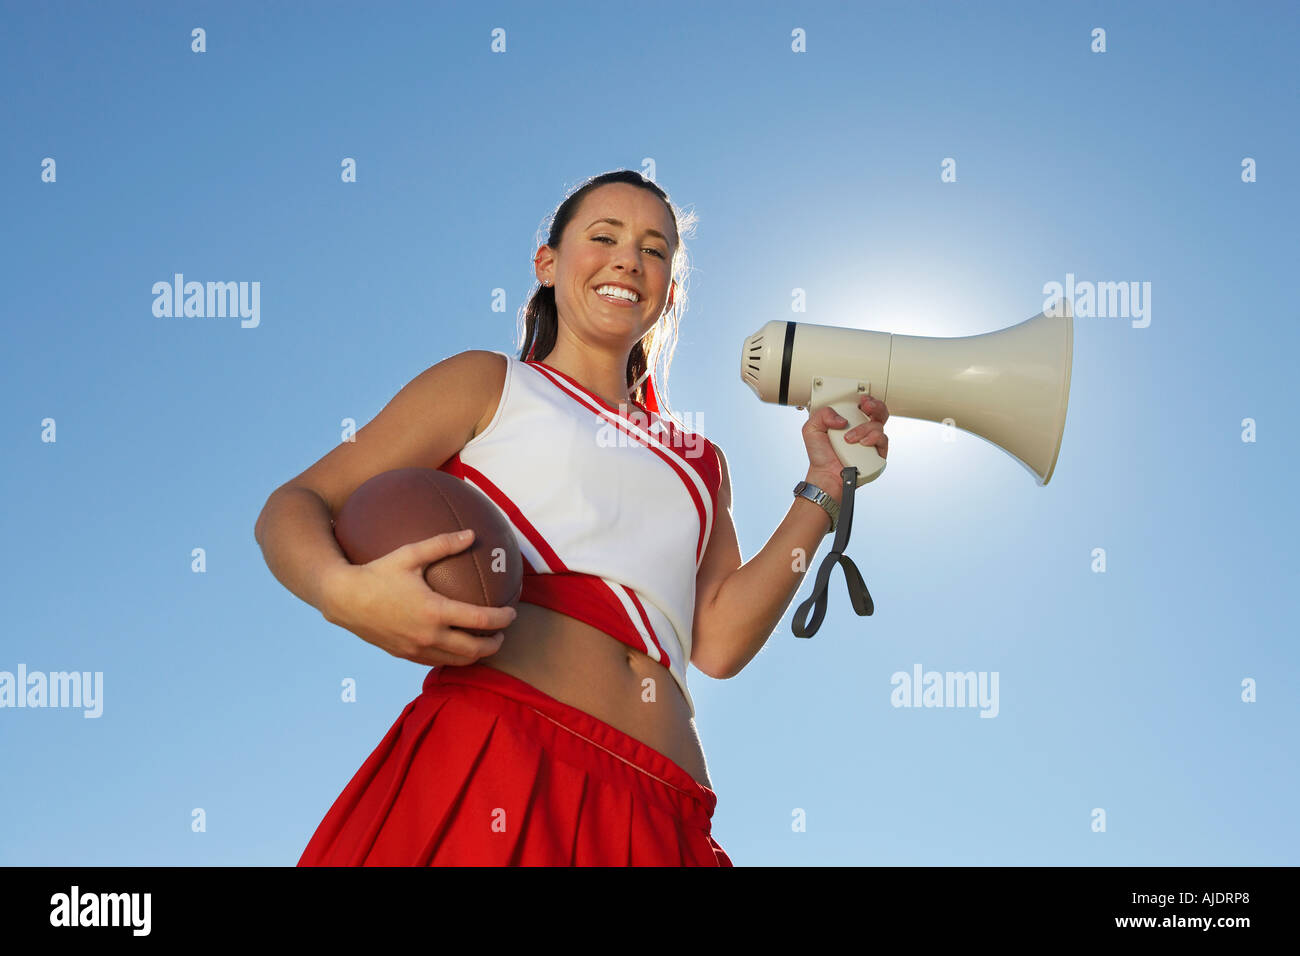 Cheerleader Holding Football and Megaphone, low angle view, portrait, (portrait), (low angle view) Stock Photo